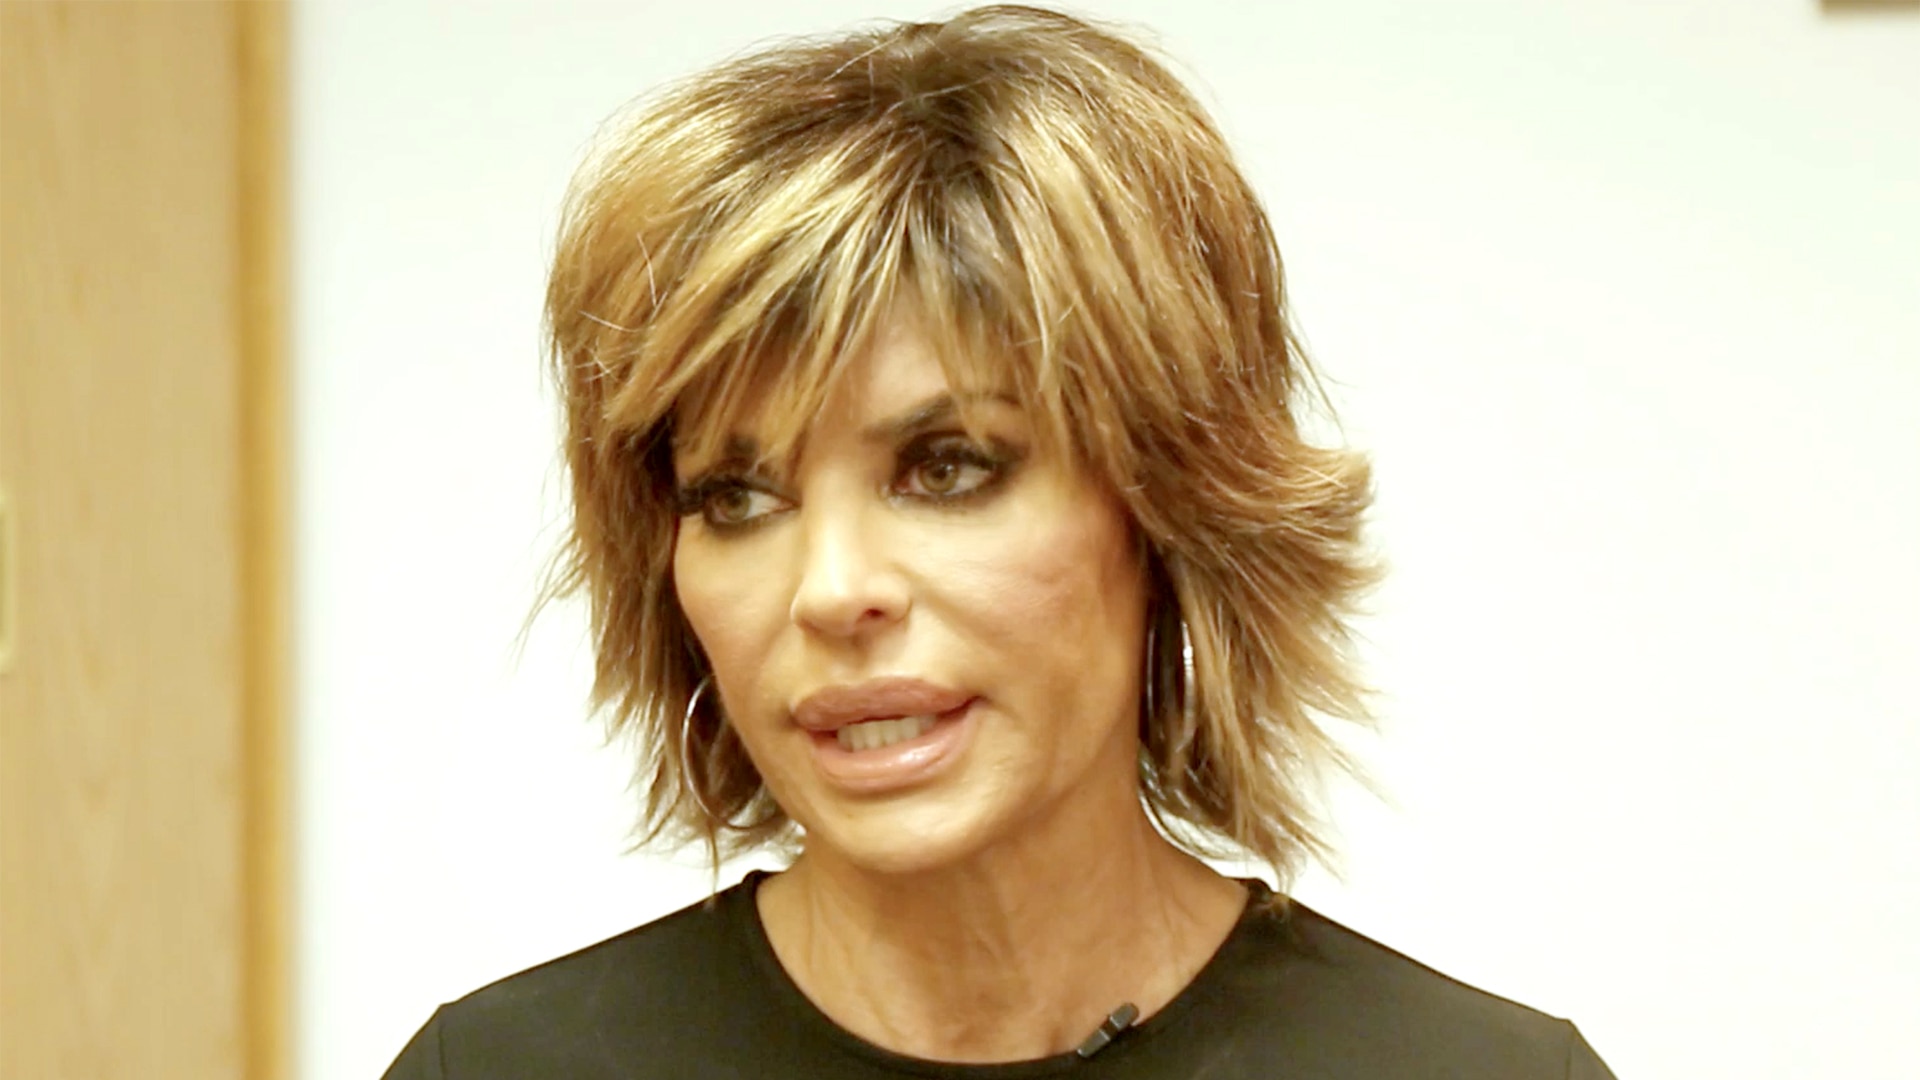 lisa rinna wears shoulder-length lob hairstyle, ditches